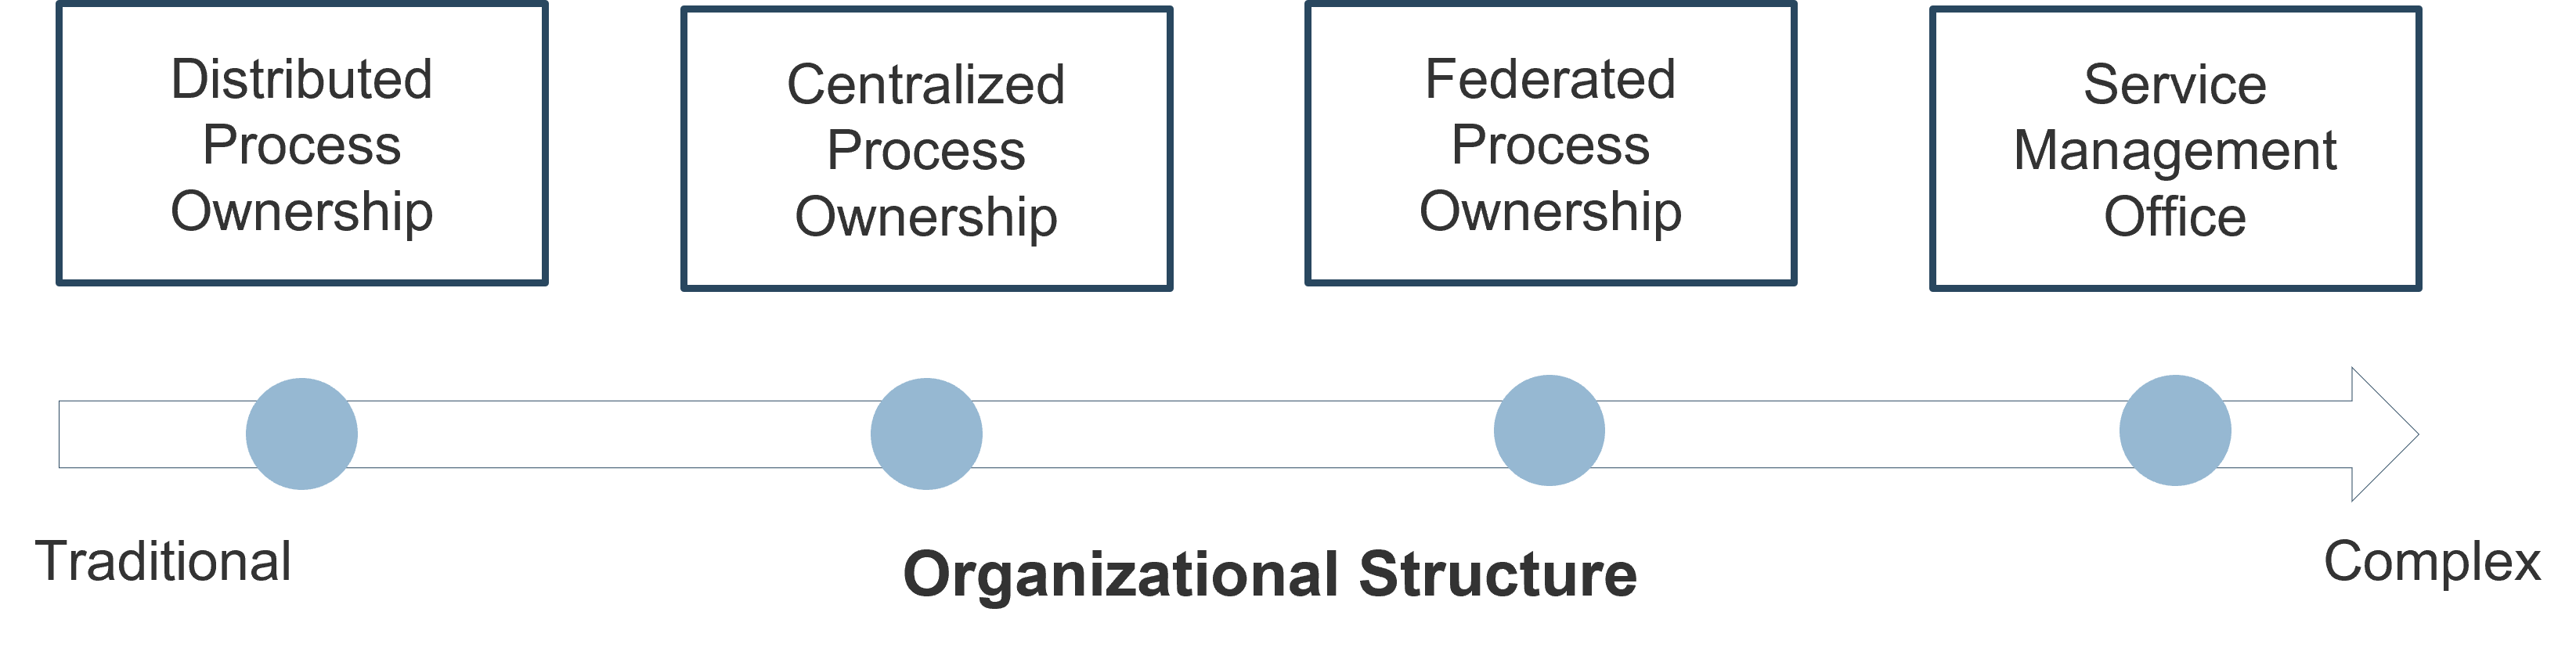 An organizational structure is shown. In the image is an arrow, with the tip facing in the right direction. The left side of the arrow is labelled: Traditional, and the right side is labelled: Complex. The four models are noted along the arrow. Starting on the left side and going to the right are: Distributed Process Ownership, Centralized Process Ownership, Federated Process Ownership, and Service Management Office.